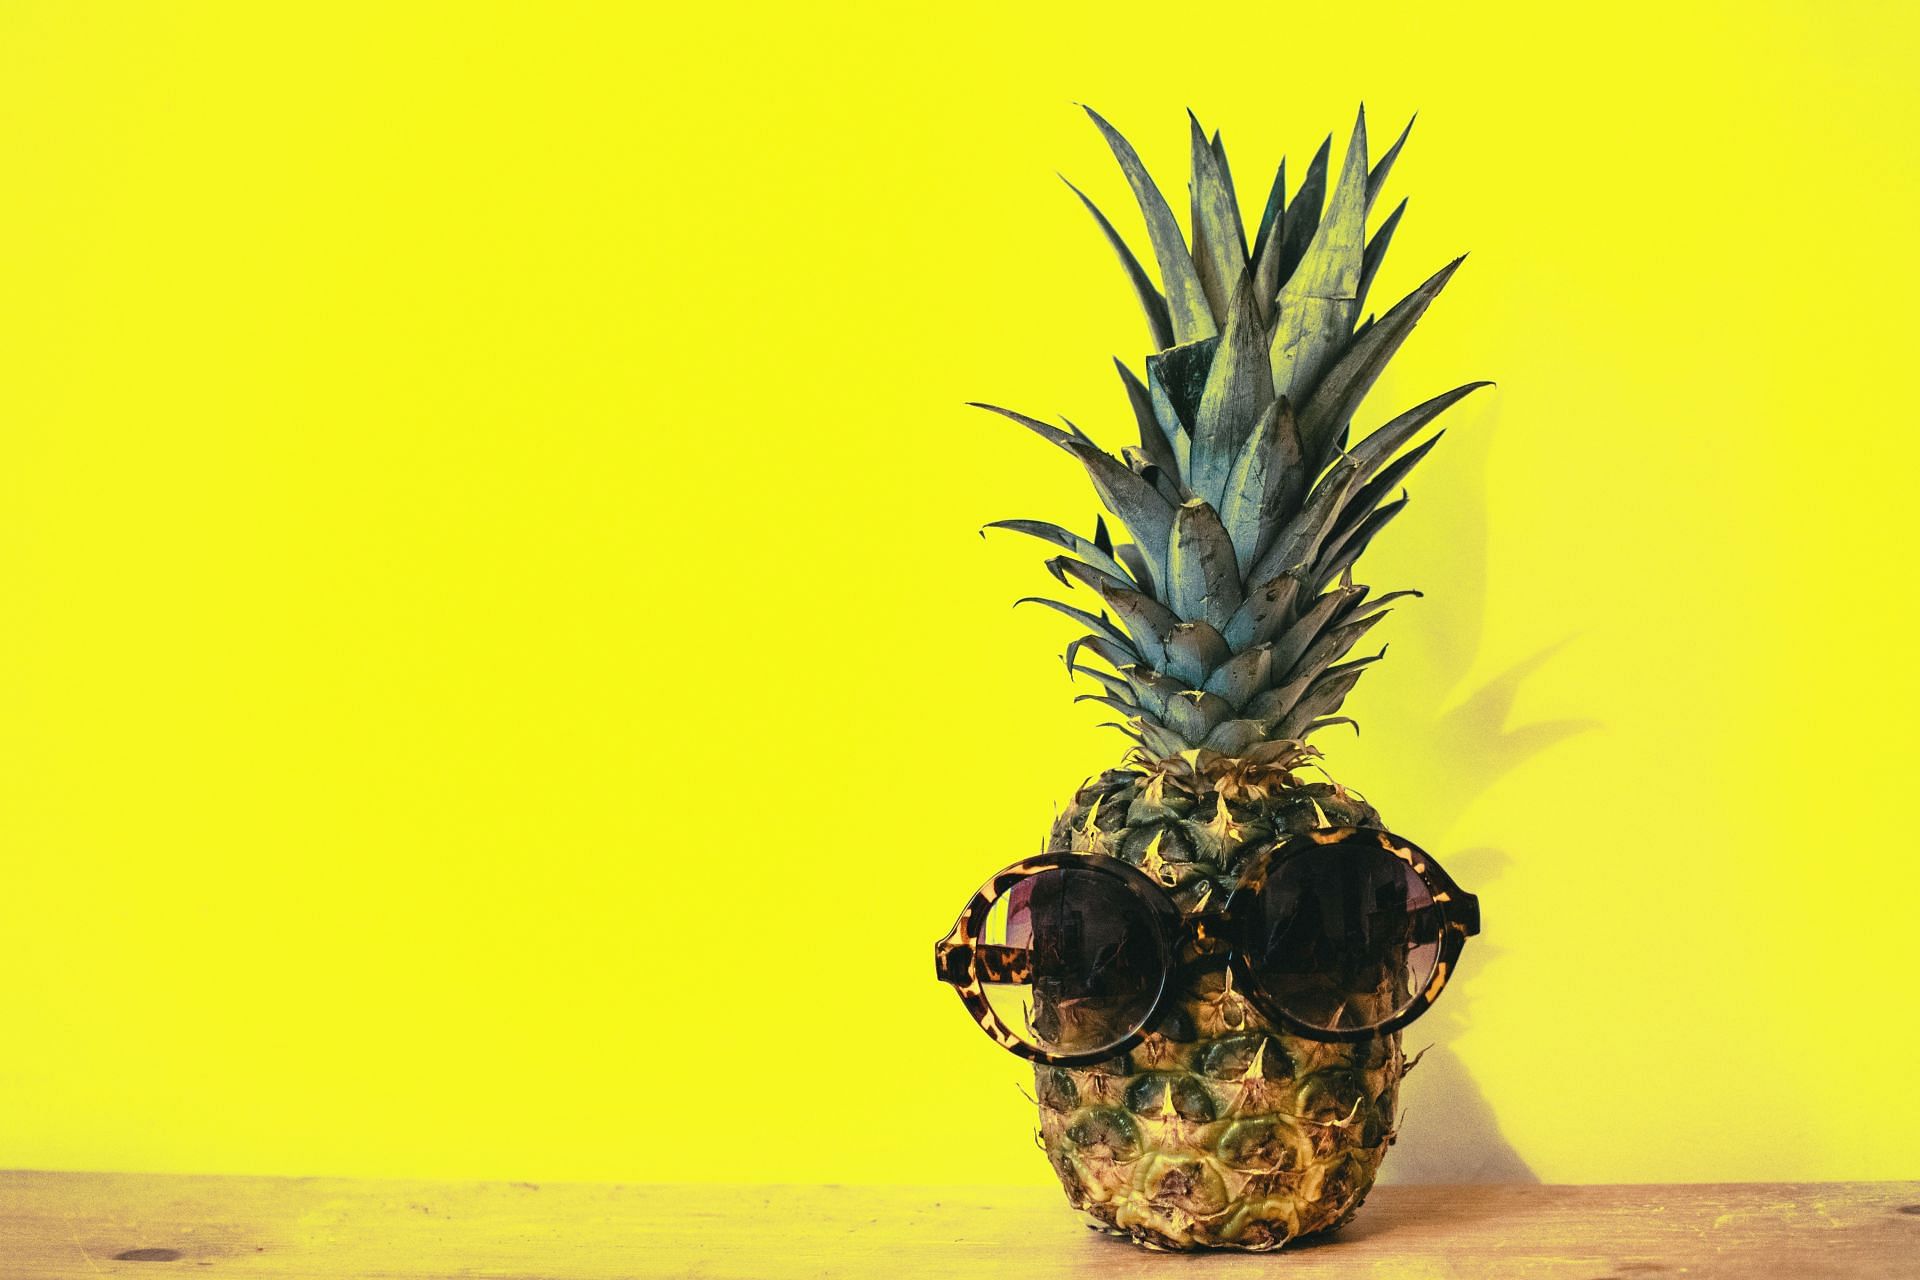 Pineapples are also an acidic fruit and good for the digestive system. (Image via Pexels/Lisa Fotios)